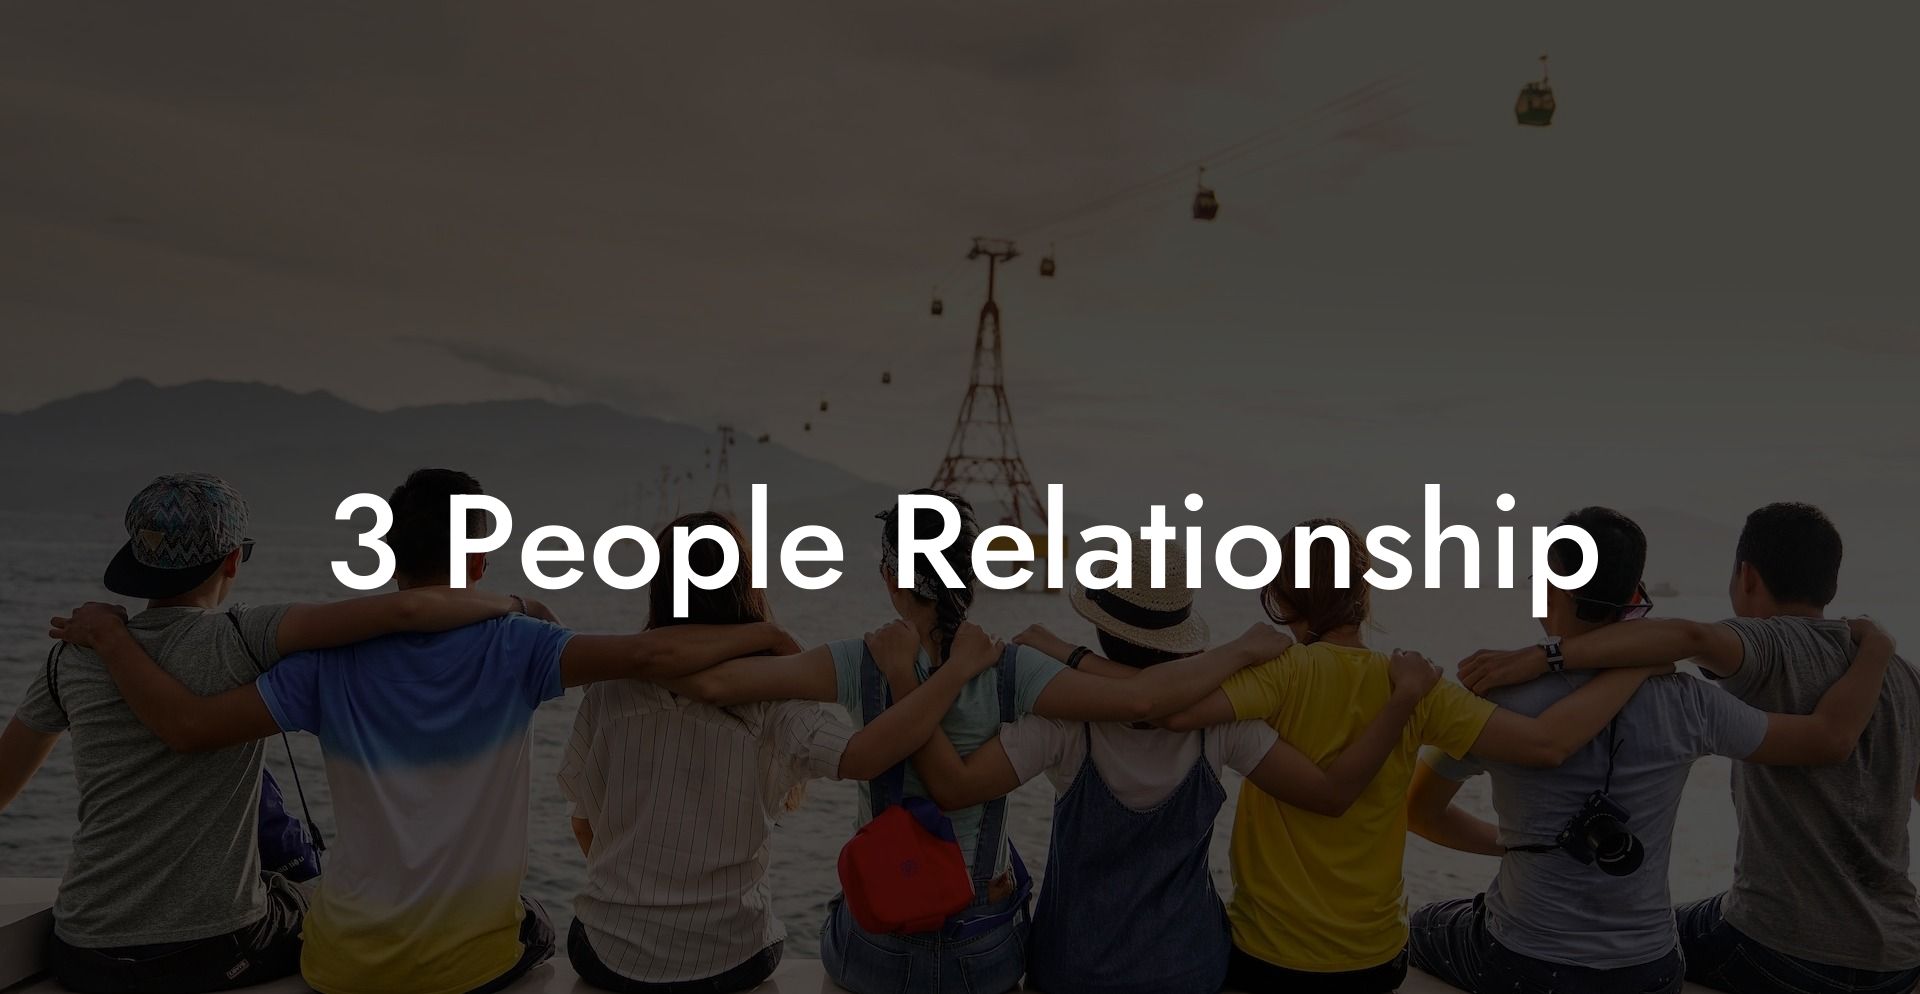 3 People Relationship